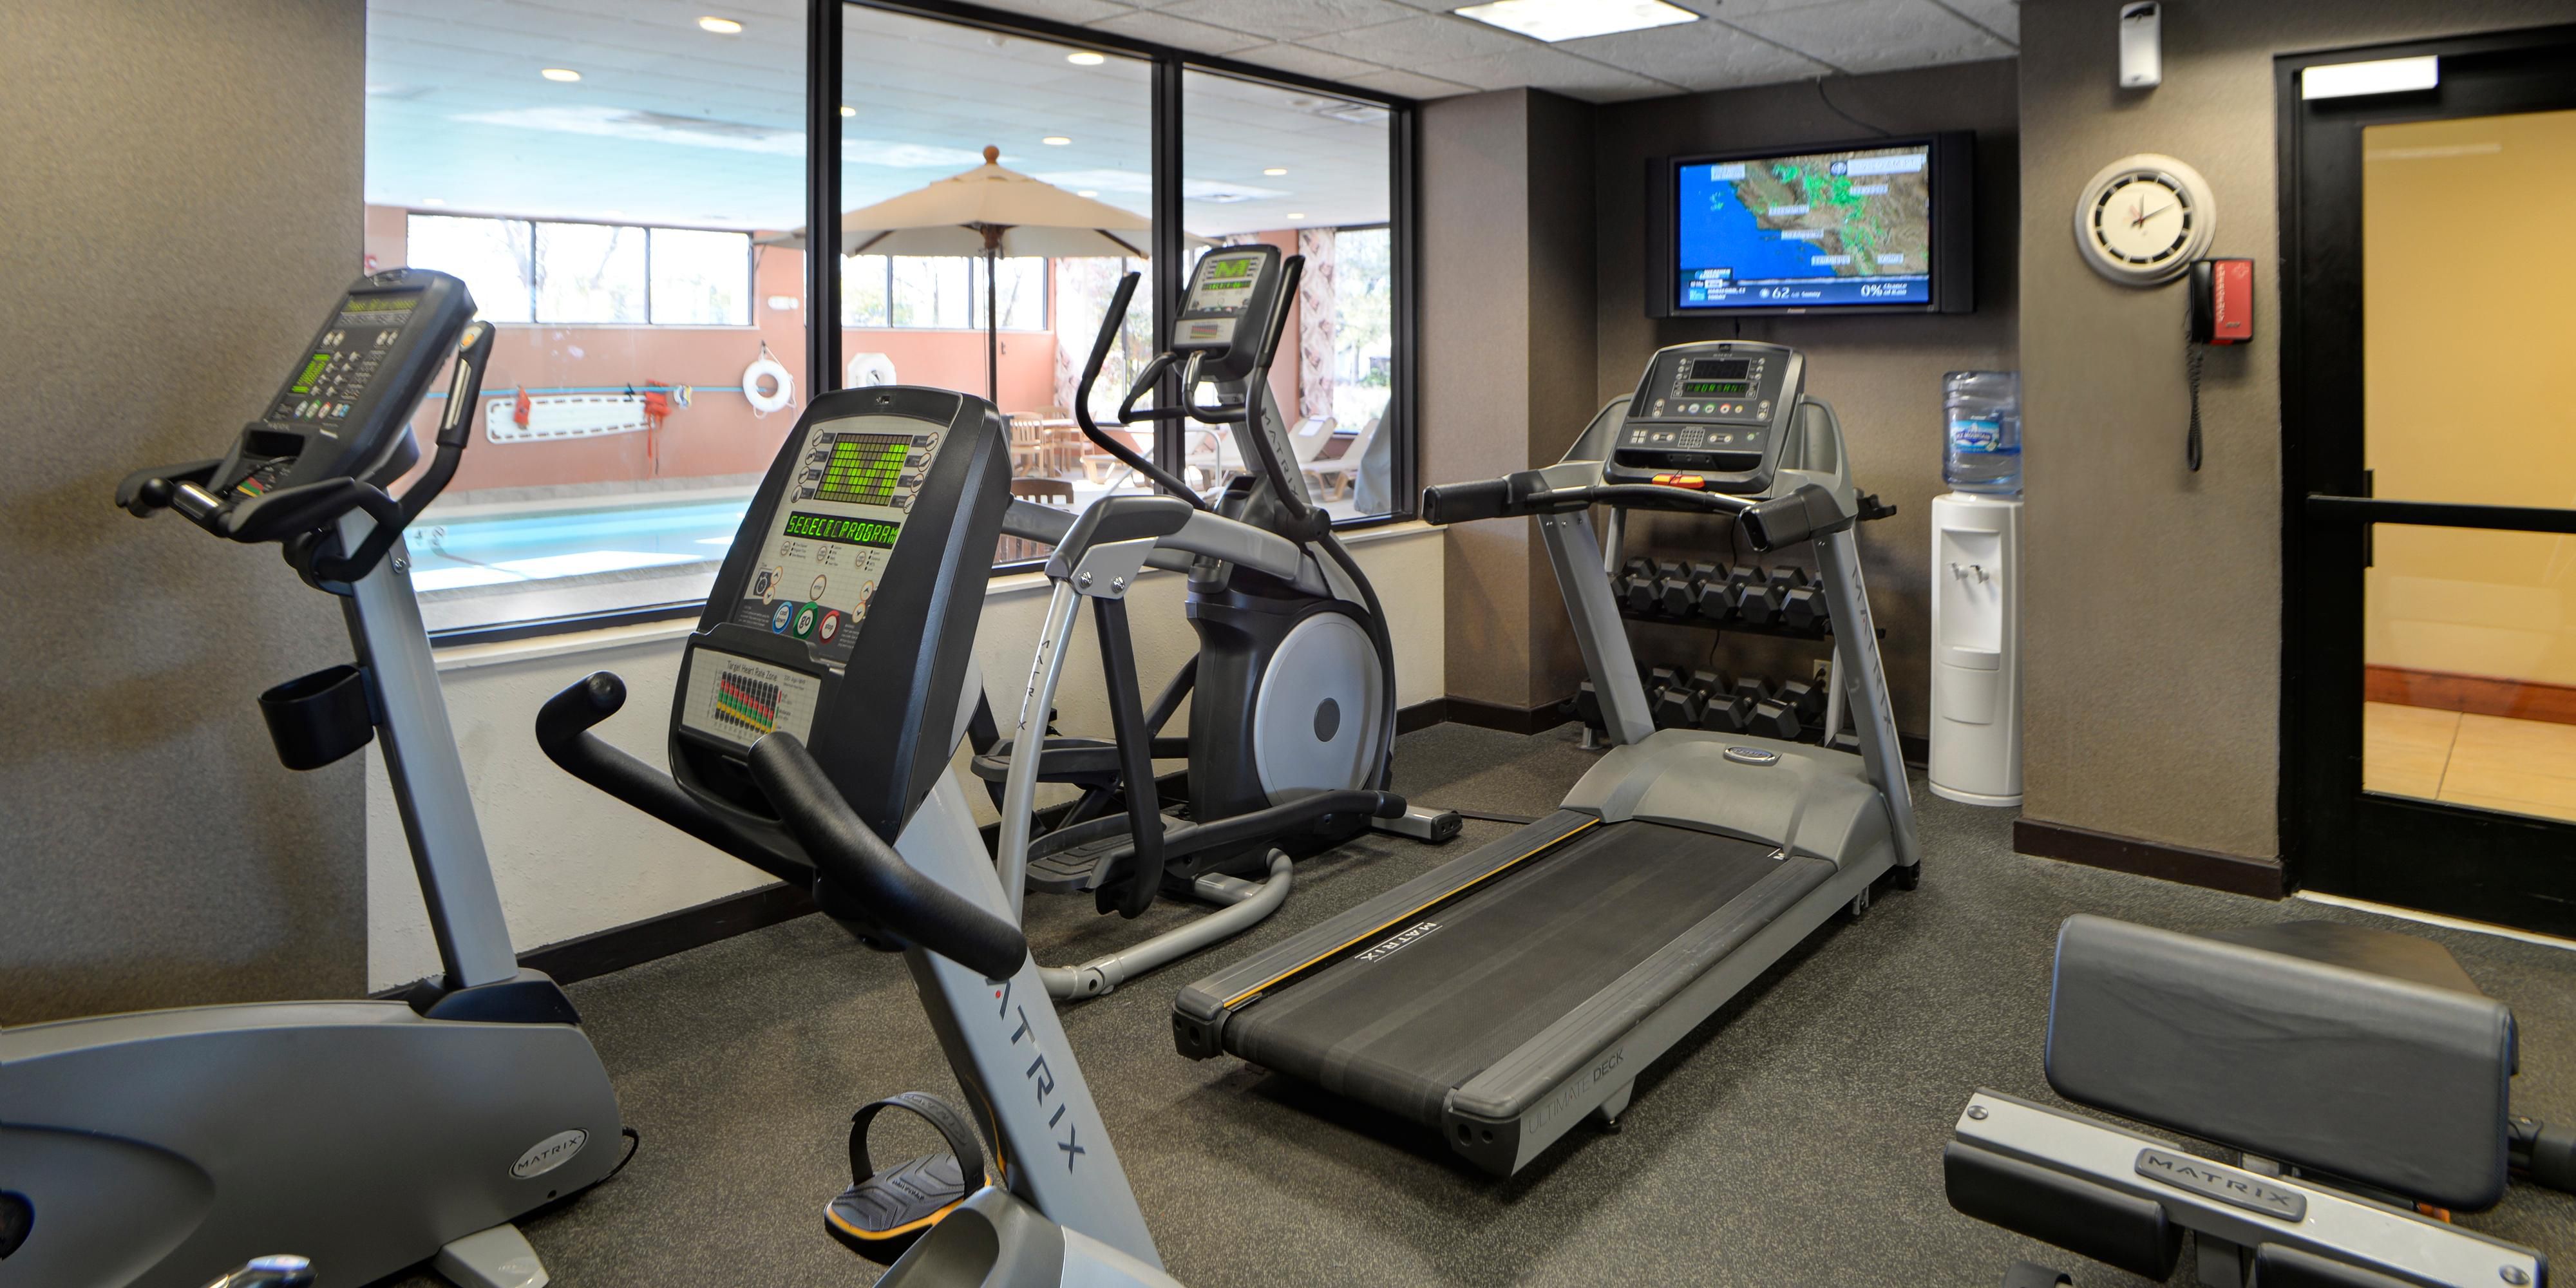 Stay fit and don’t give up your daily exercise routine when staying at the Holiday Inn Express Indianapolis South. Featuring a 24/7 fitness center stocked with all of your fitness needs, guests can fit in their daily exercise anytime of the day or night.